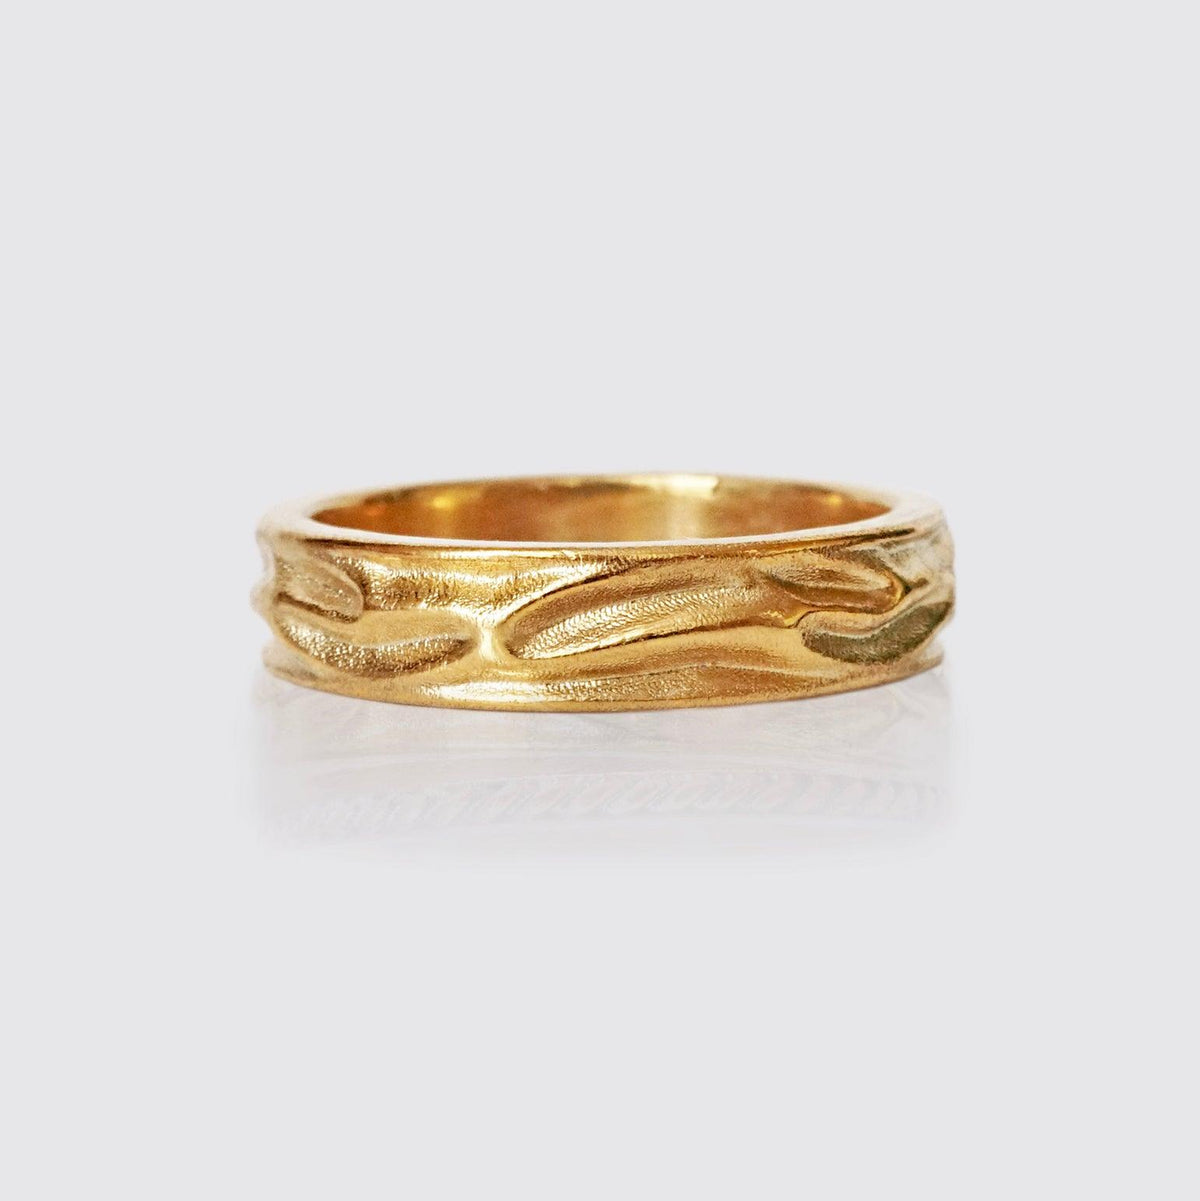 Liquid Ring in Sterling Silver and 14K Gold, 5mm